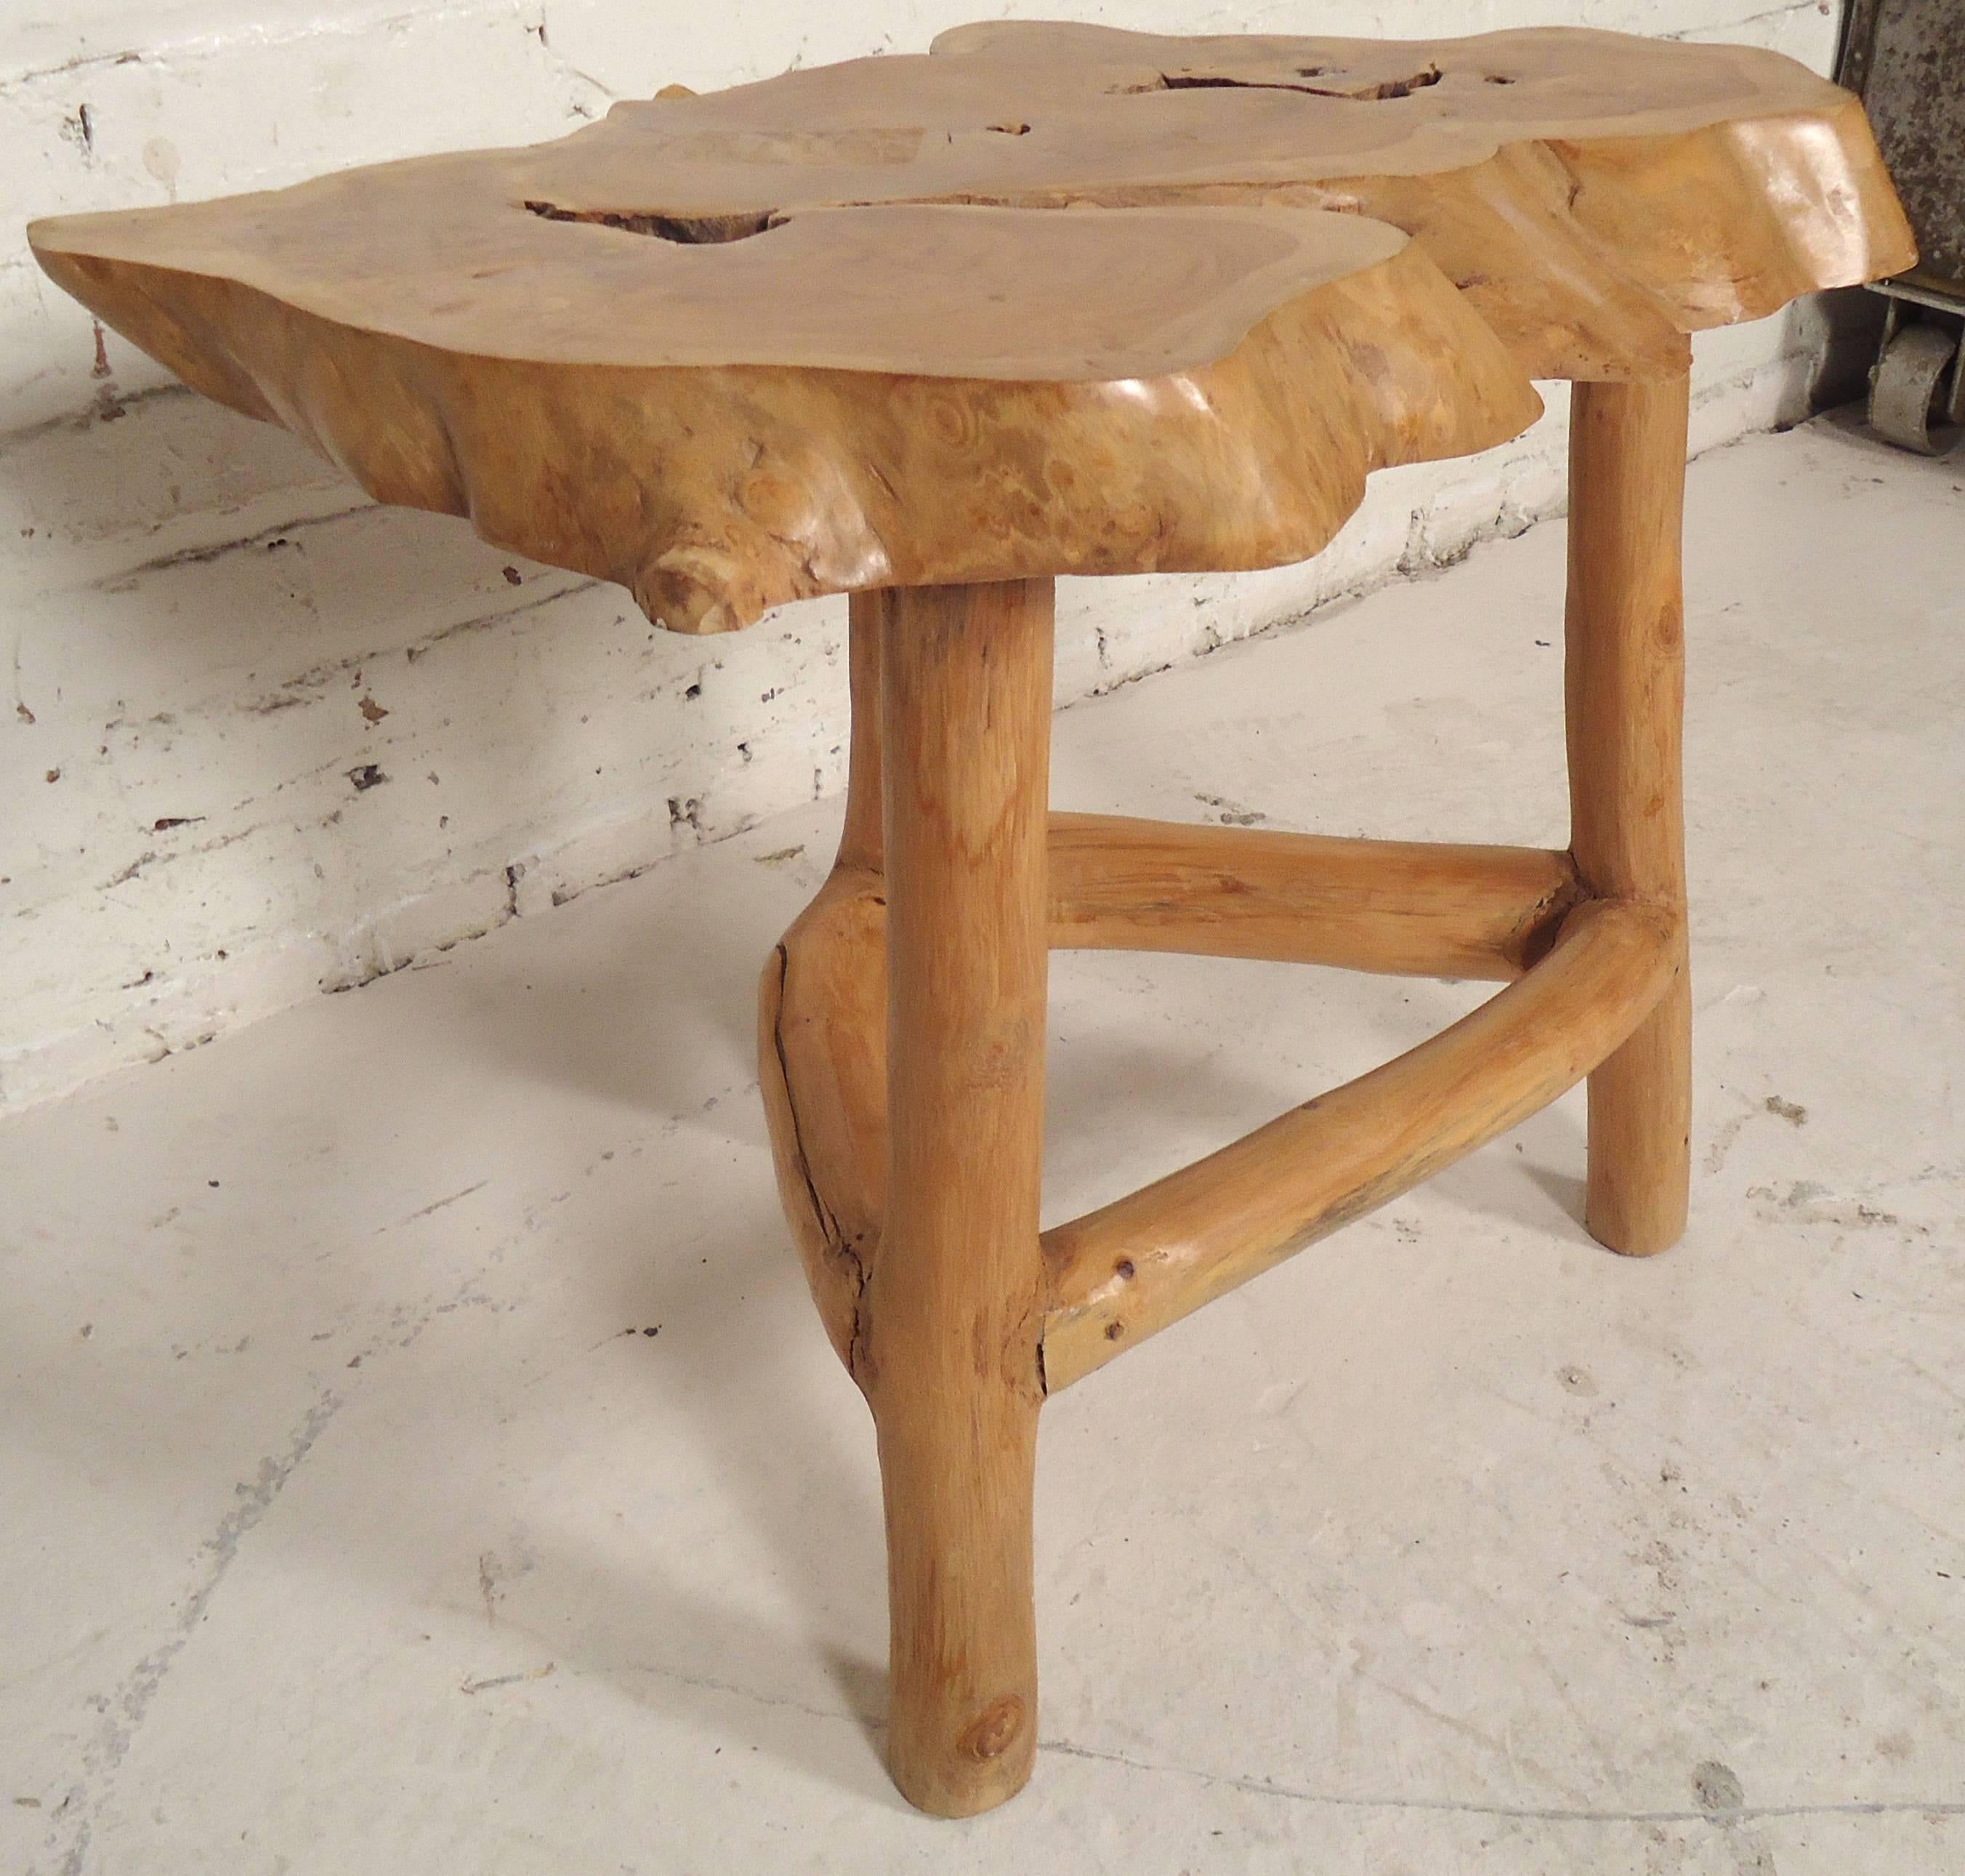 Unique side table with live edge and beautiful grain. Set on three wooden legs. Makes a fantastic plant stand.

(Please confirm item location NY or NJ with dealer).
      